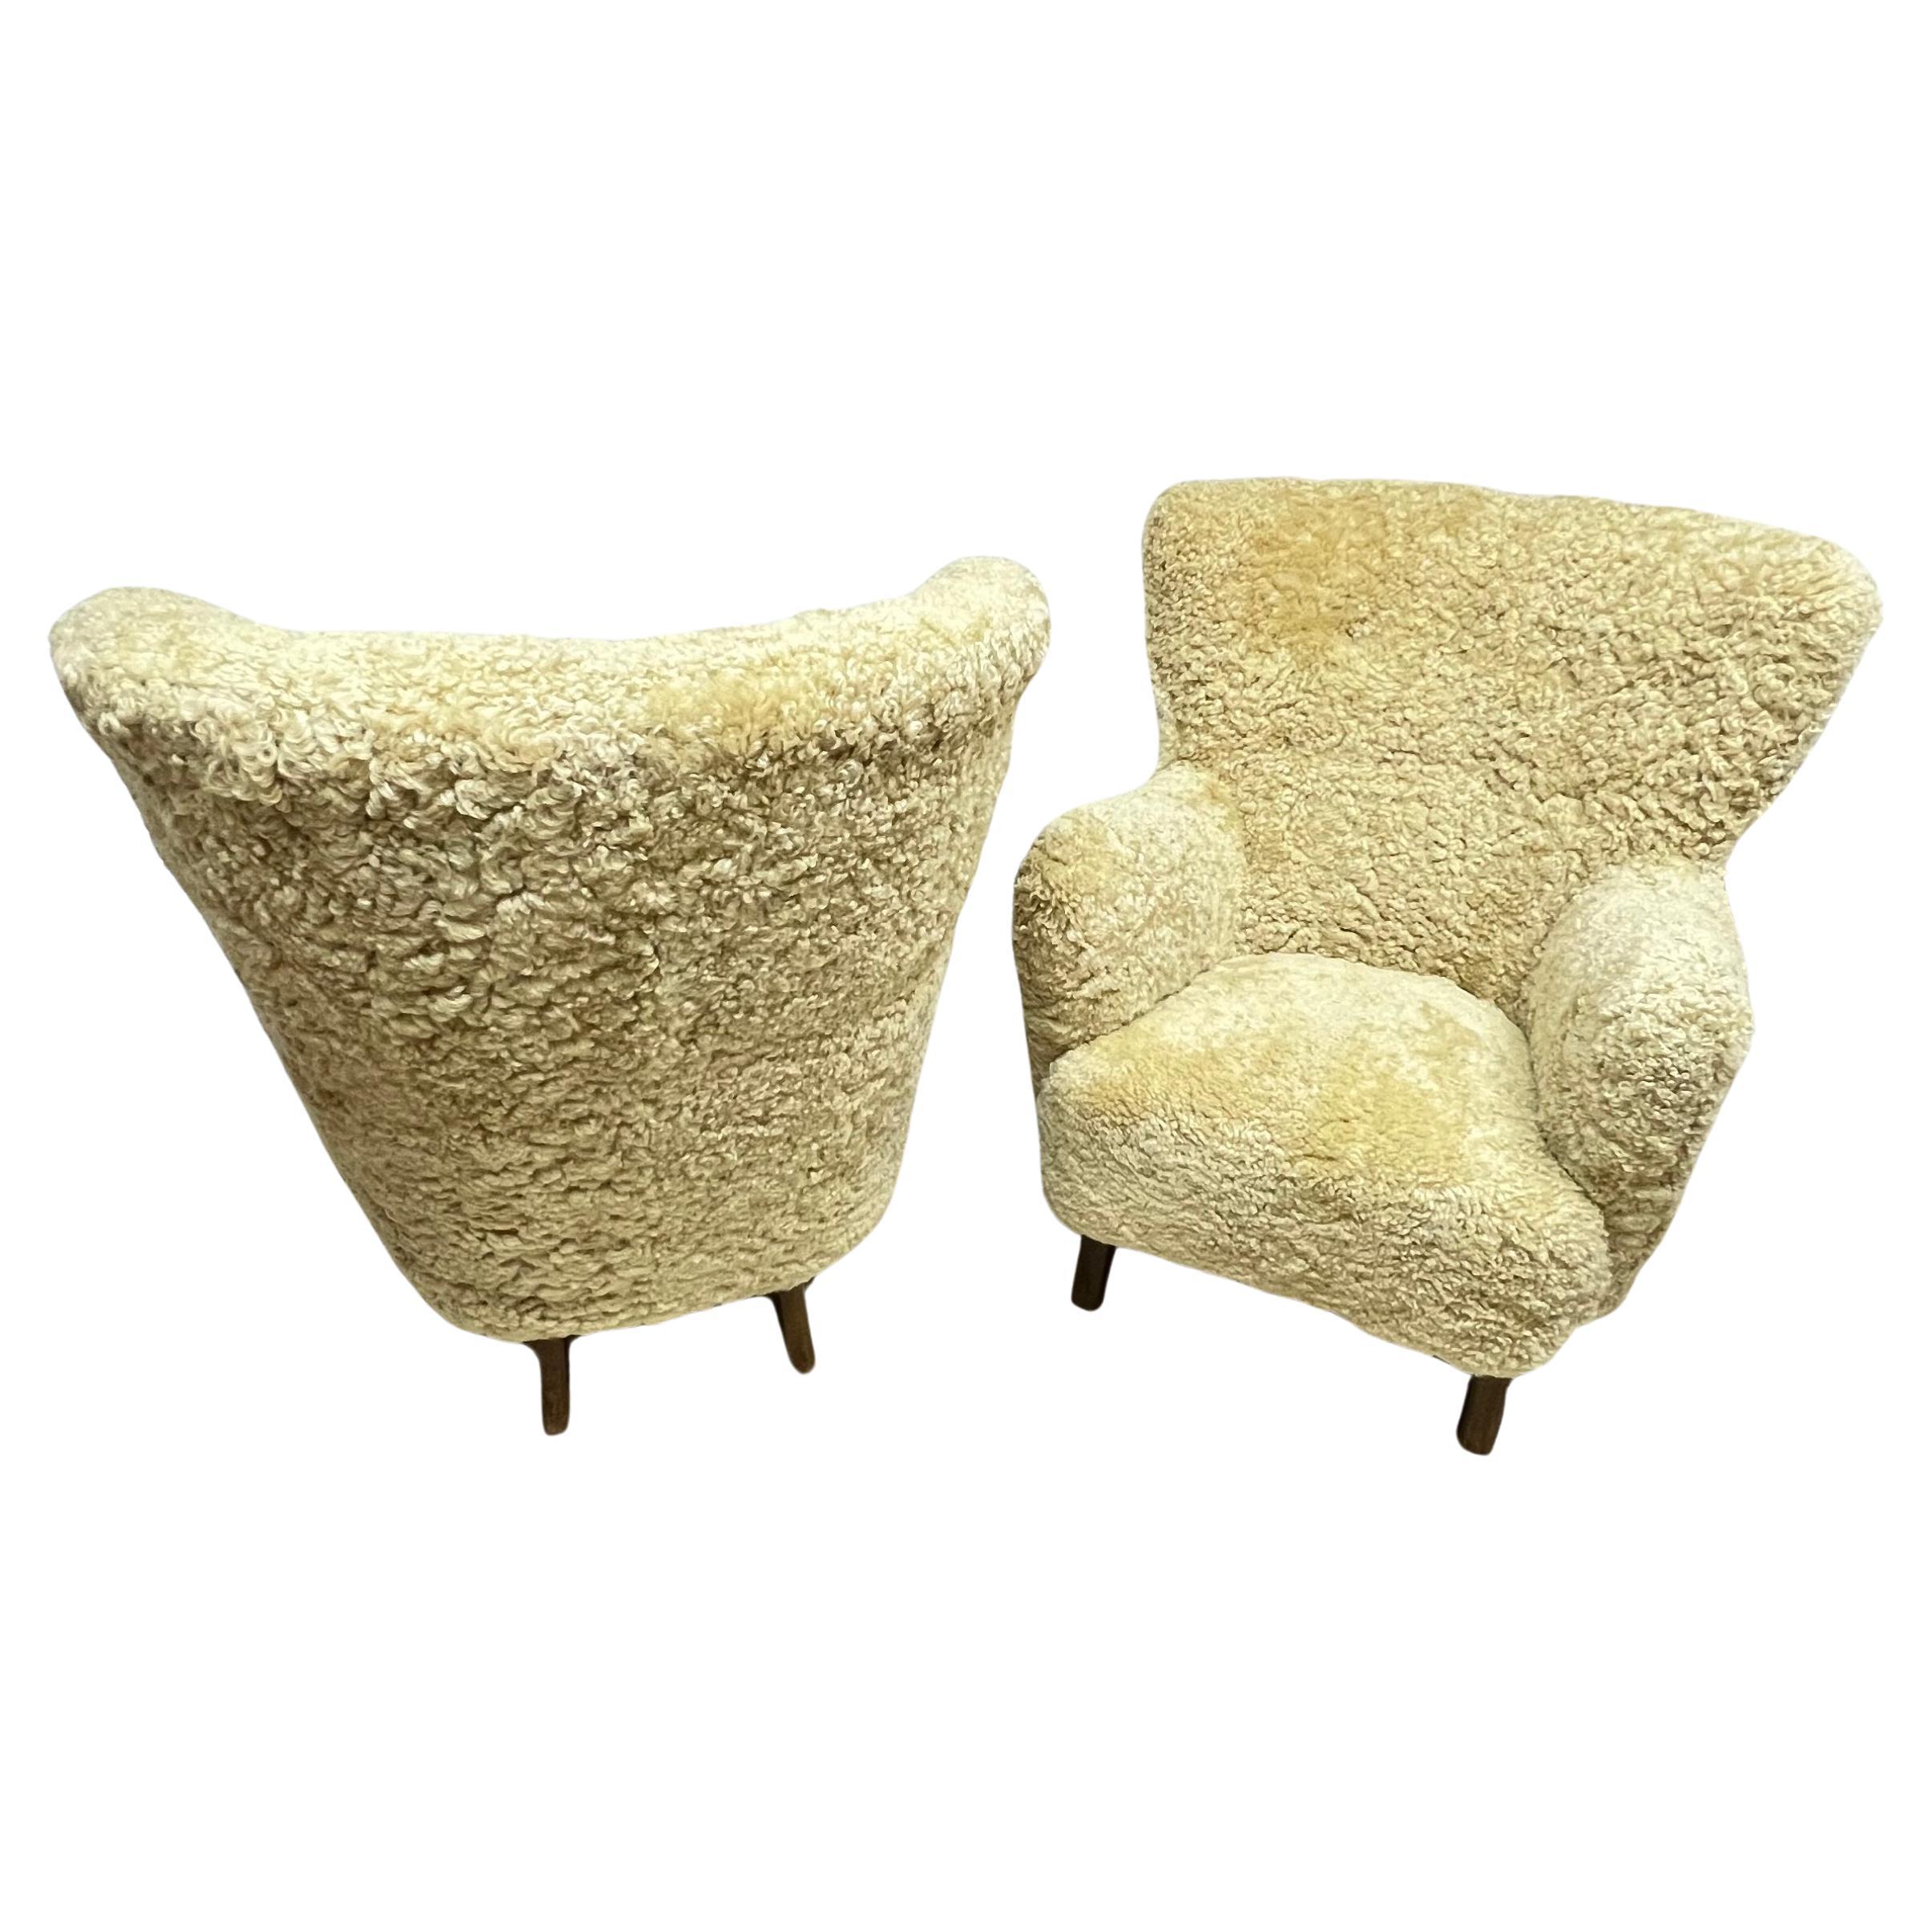 Pair of Shearling Chairs by Alfred Christensen, Denmark circa 1950